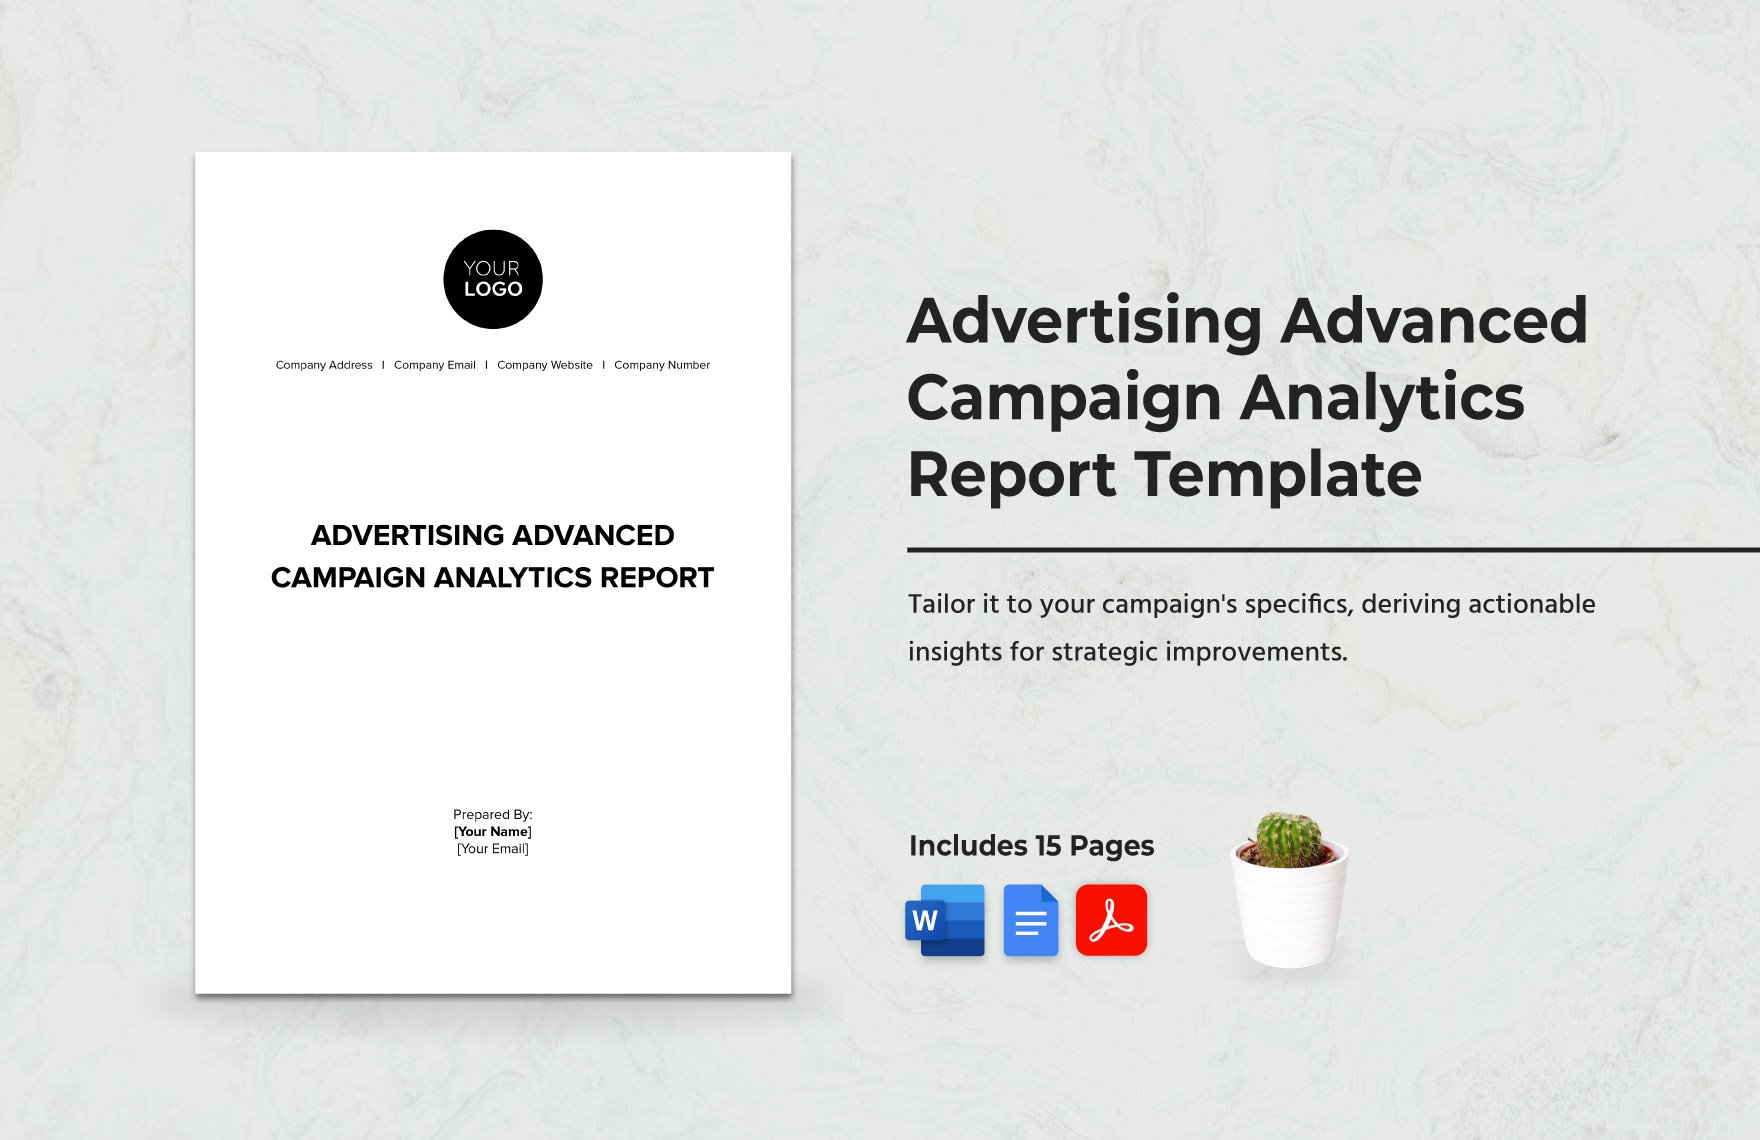 Advertising Advanced Campaign Analytics Report Template in Word, Google Docs, PDF